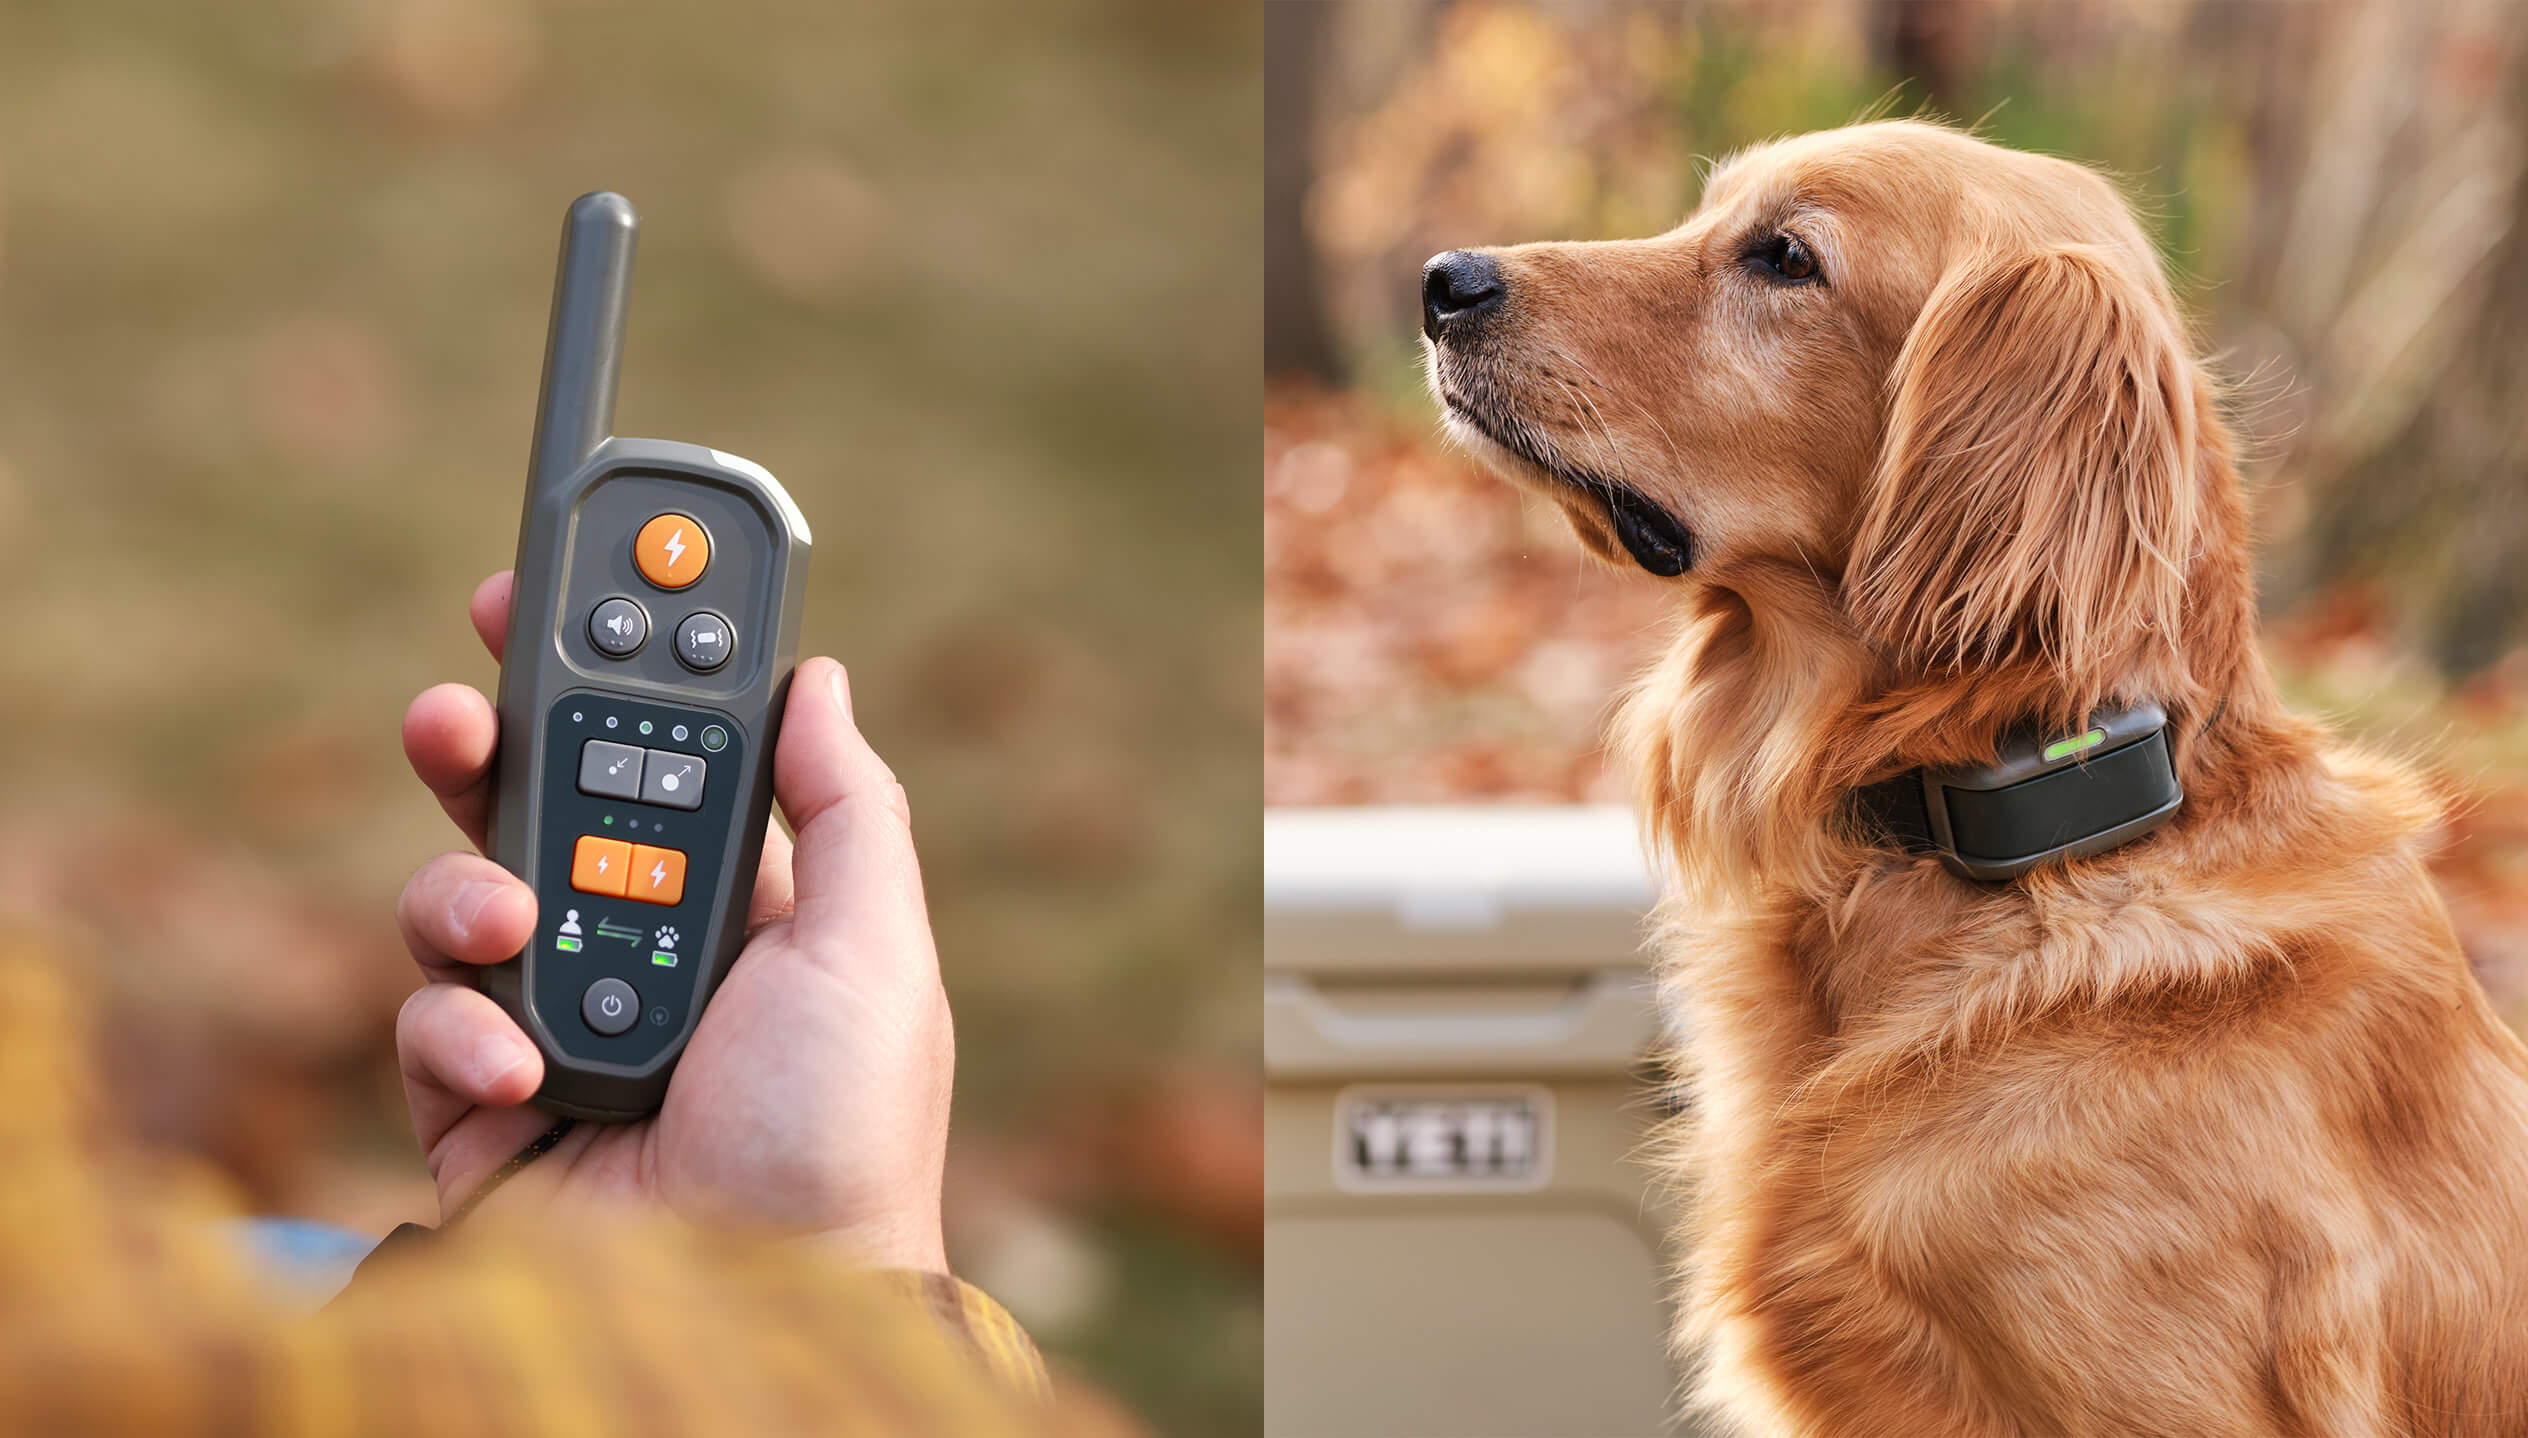 Side by side images of a hand holding the Heel™ ROAM 350™ Remote and a Golden Retriever wearing the Heel™ ROAM 350™ Training Collar while standing in front of a cooler